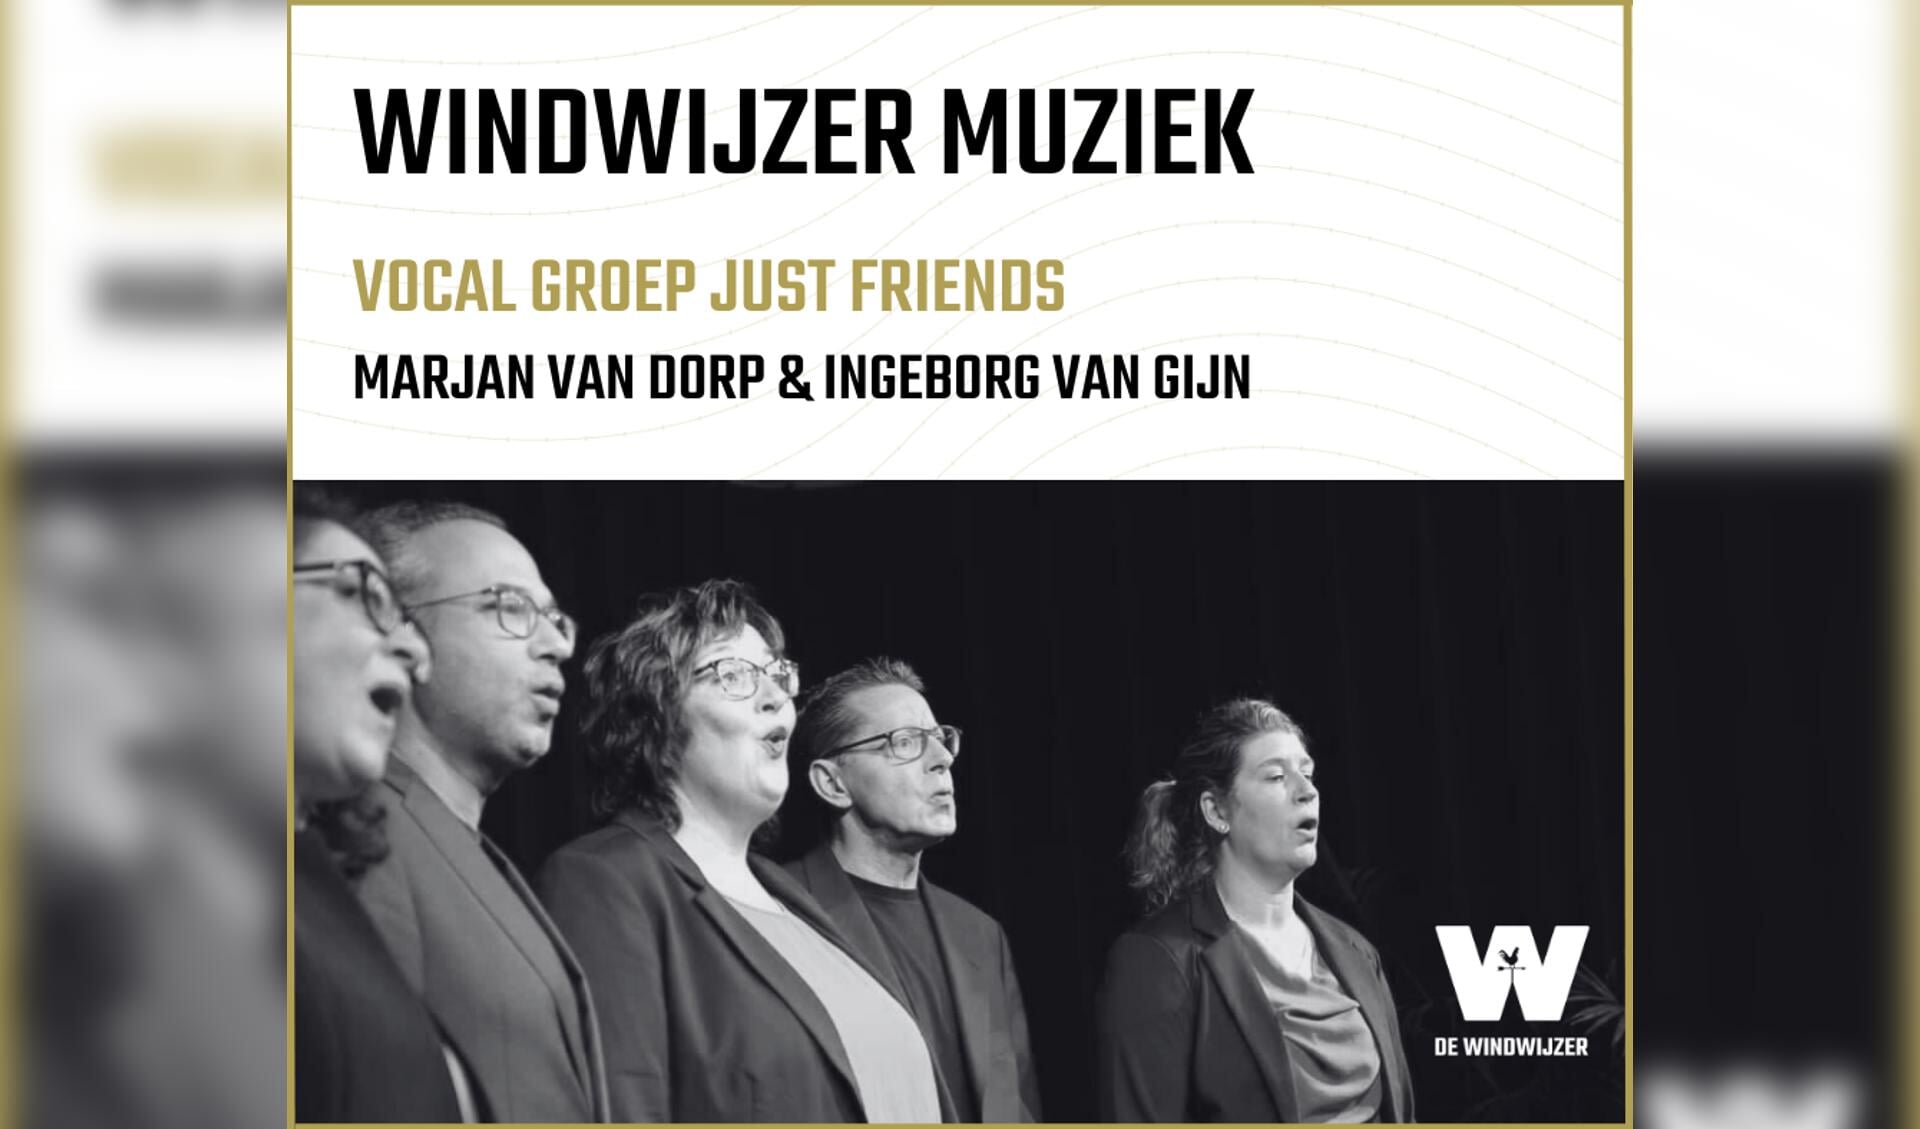 Vocal groep Just Friends.